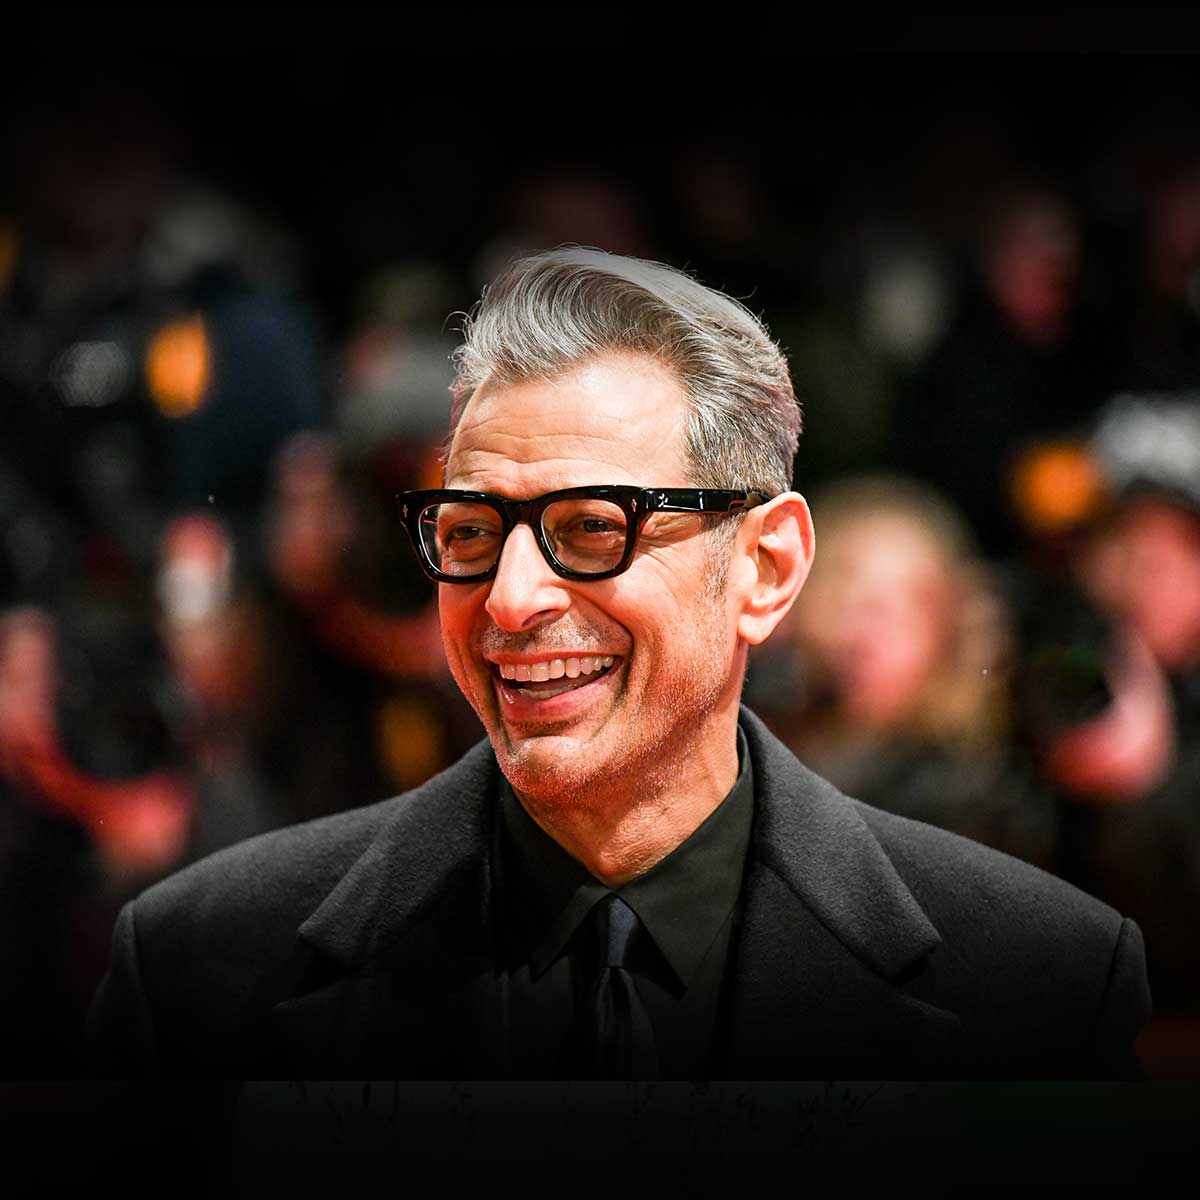 Jeff Goldblum and The Mildred Snitzer Orchestra at Fox Theater Oakland